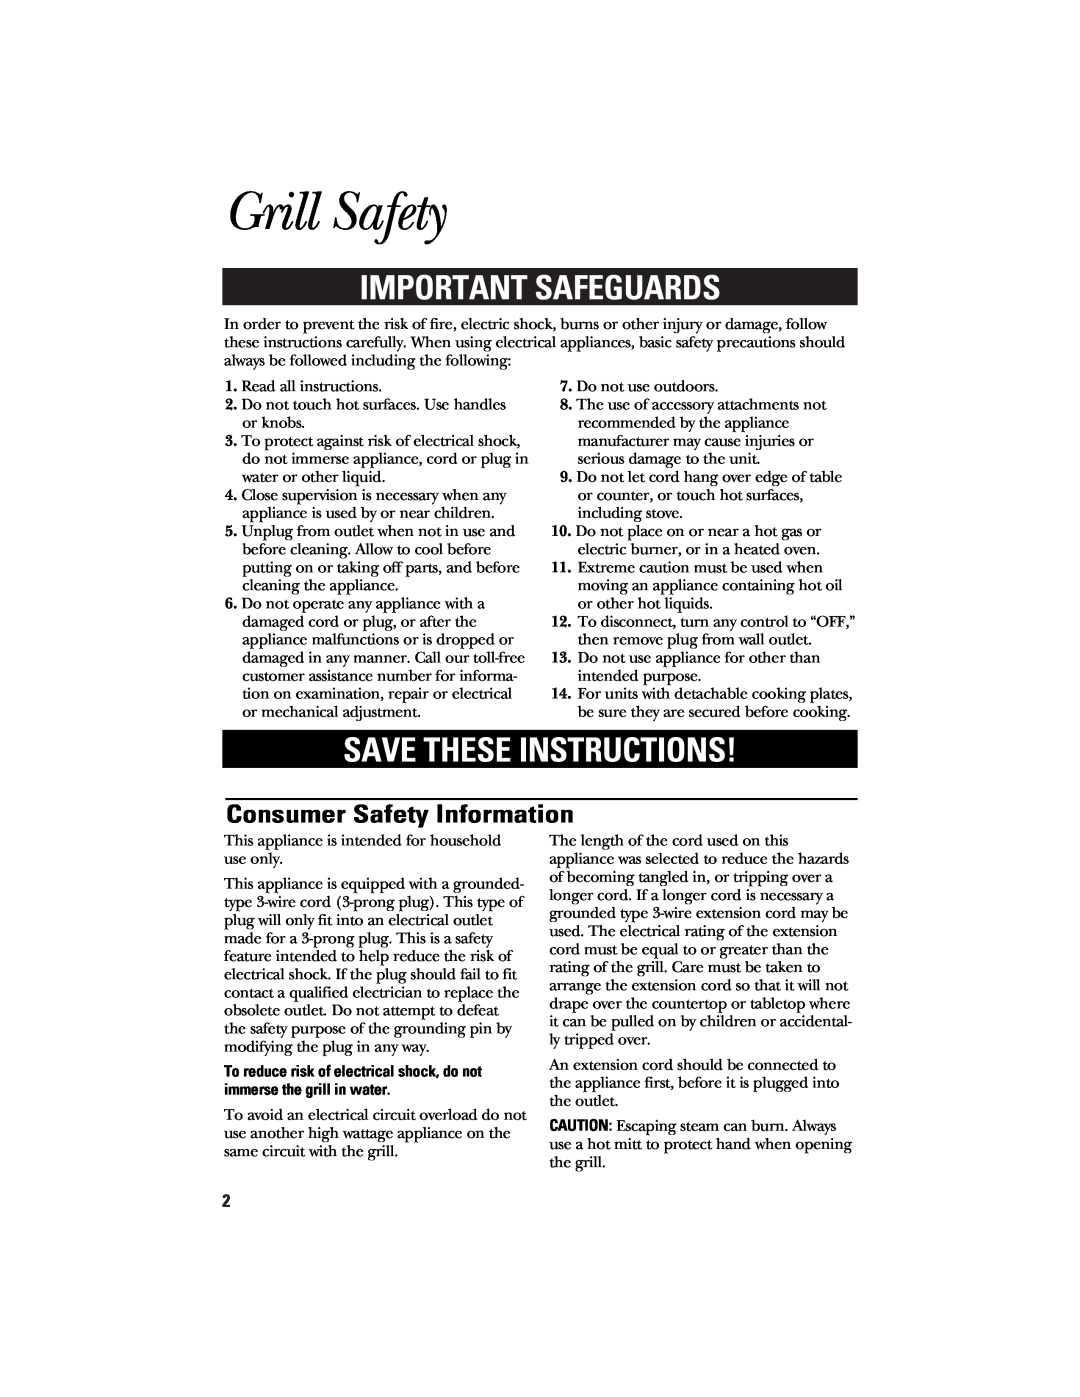 GE 840077700, 106642 Grill Safety, Important Safeguards, Save These Instructions, Consumer Safety Information 